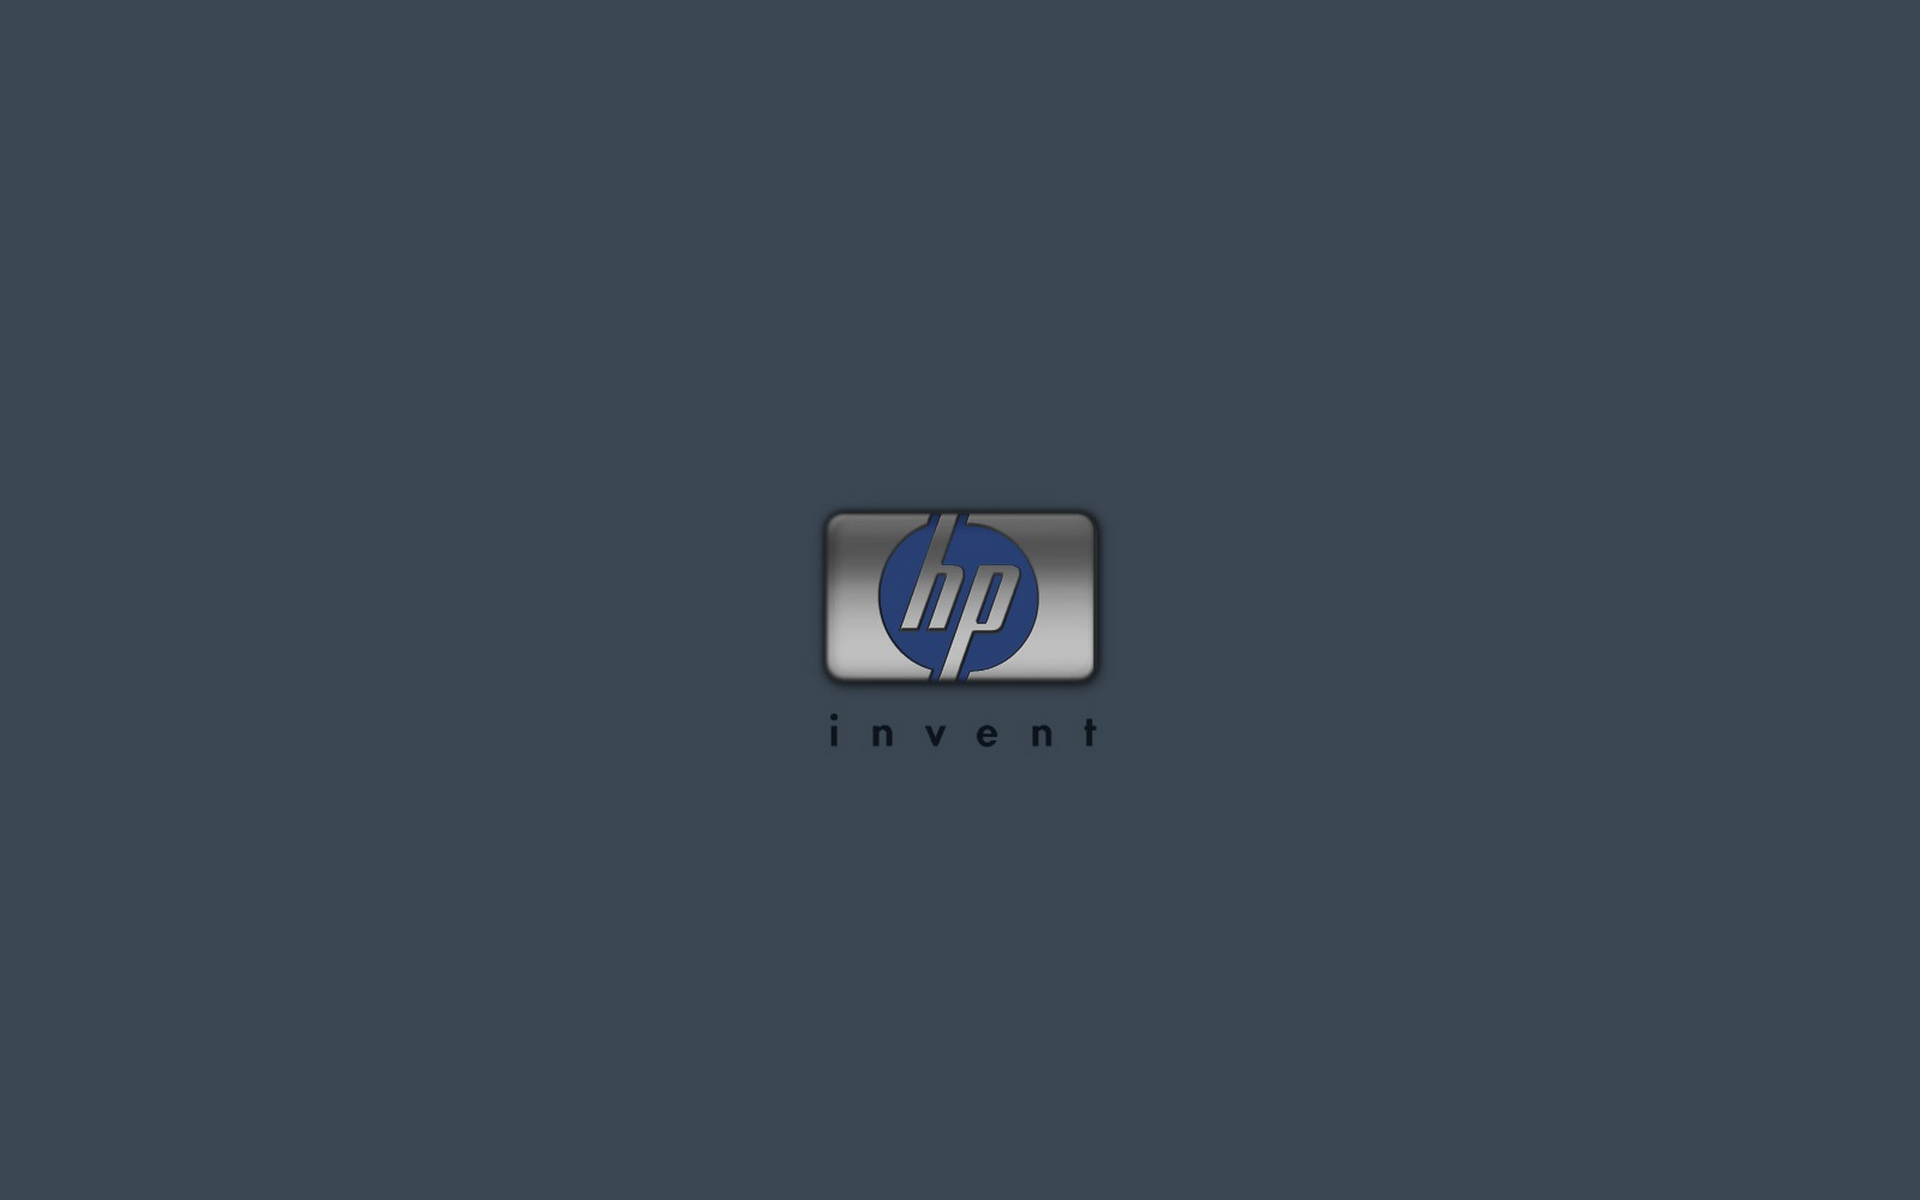 Wallpapers hp icon logo on the desktop